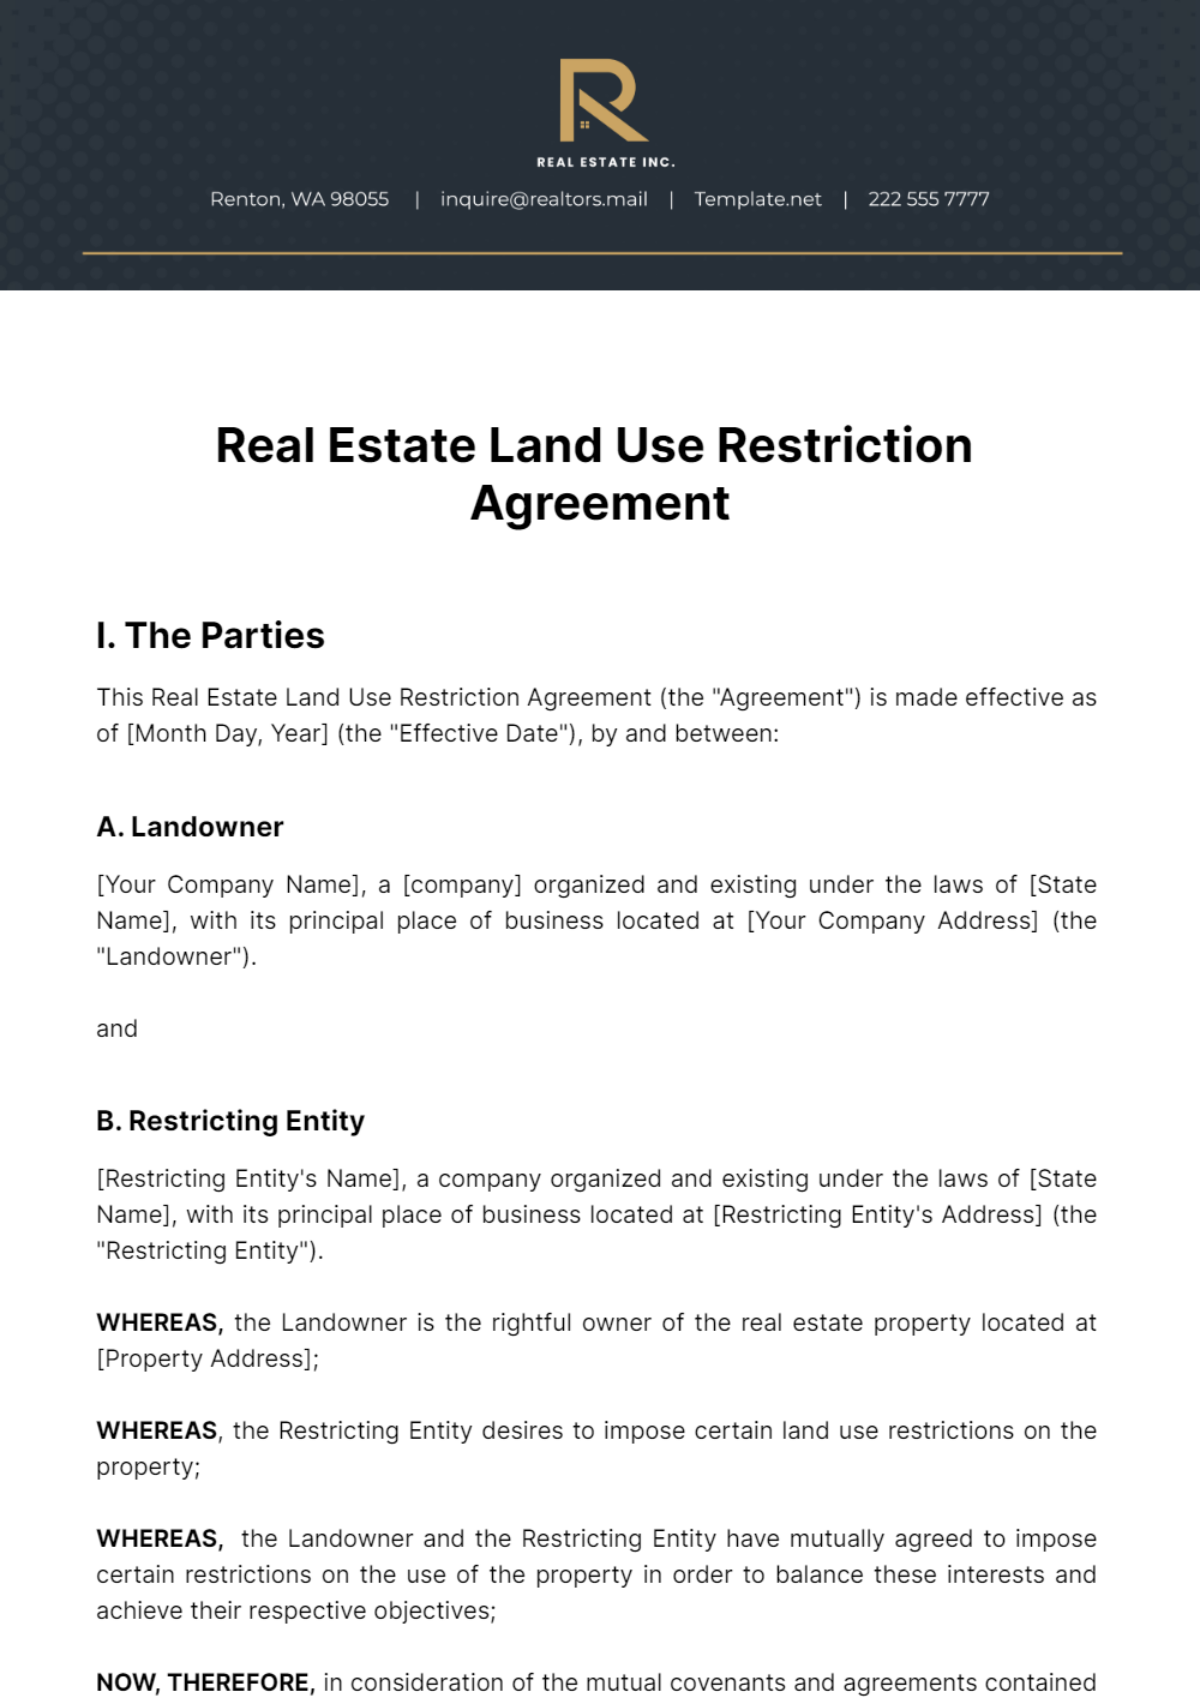 Real Estate Land Use Restriction Agreement Template